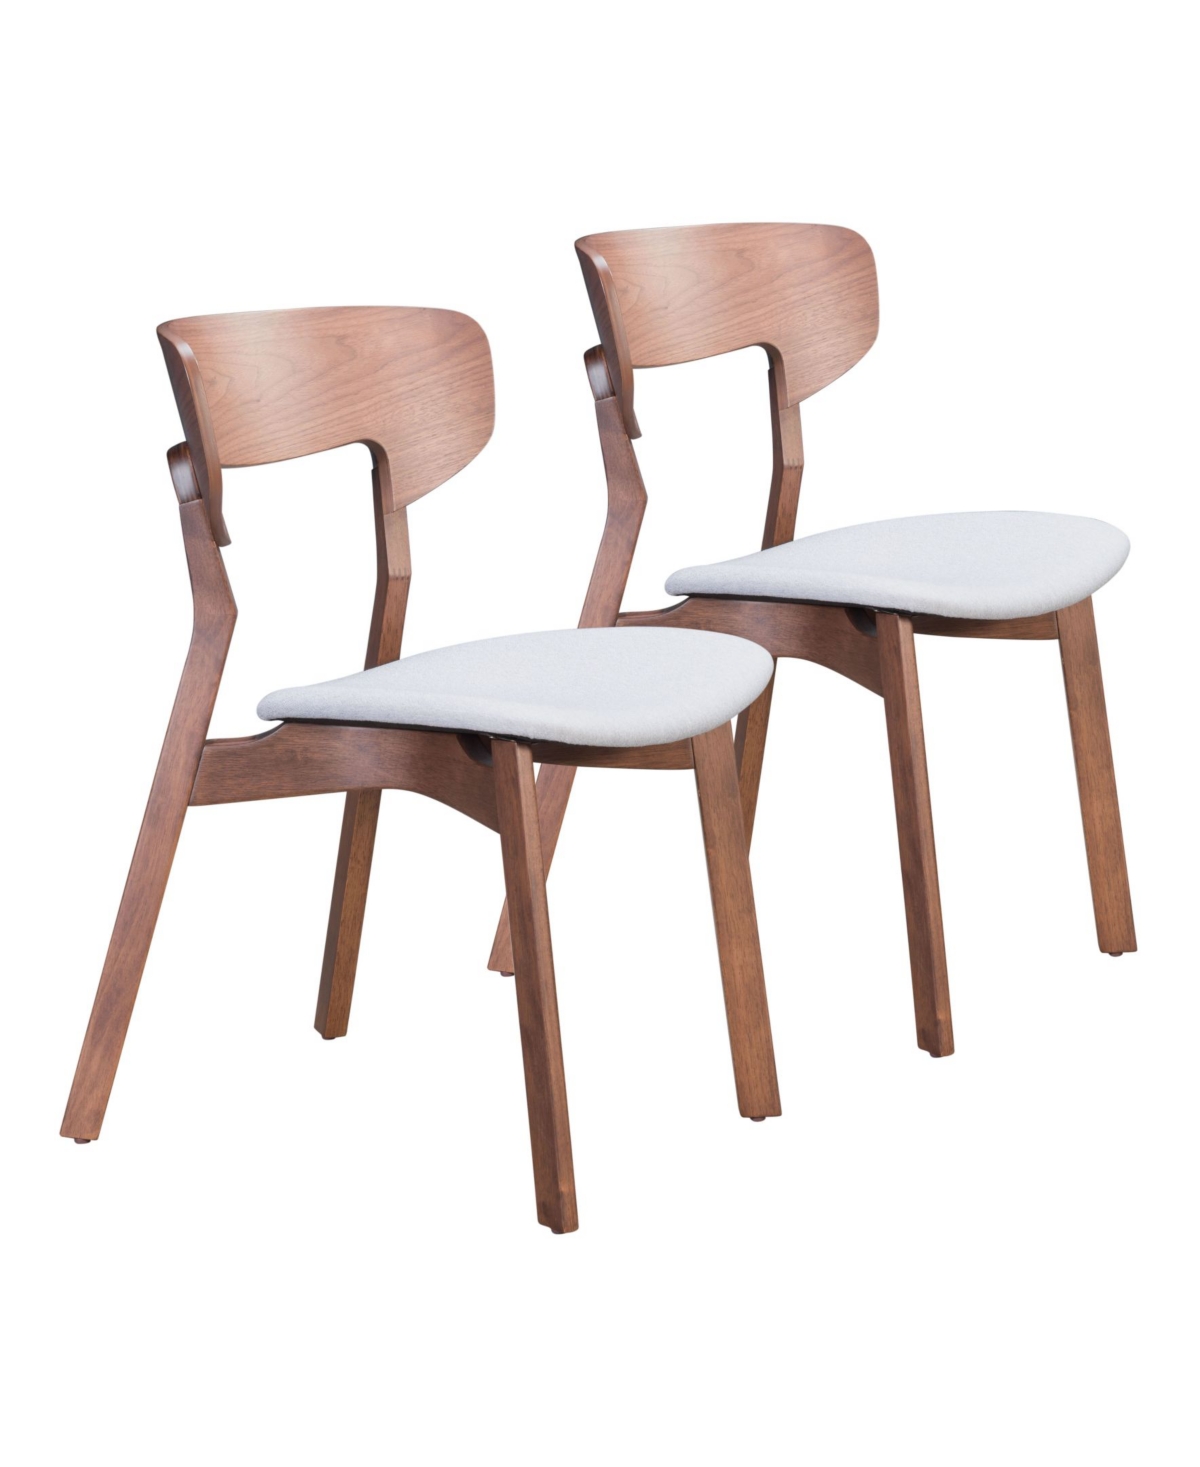 ZUO RUSSELL DINING CHAIR, SET OF 2